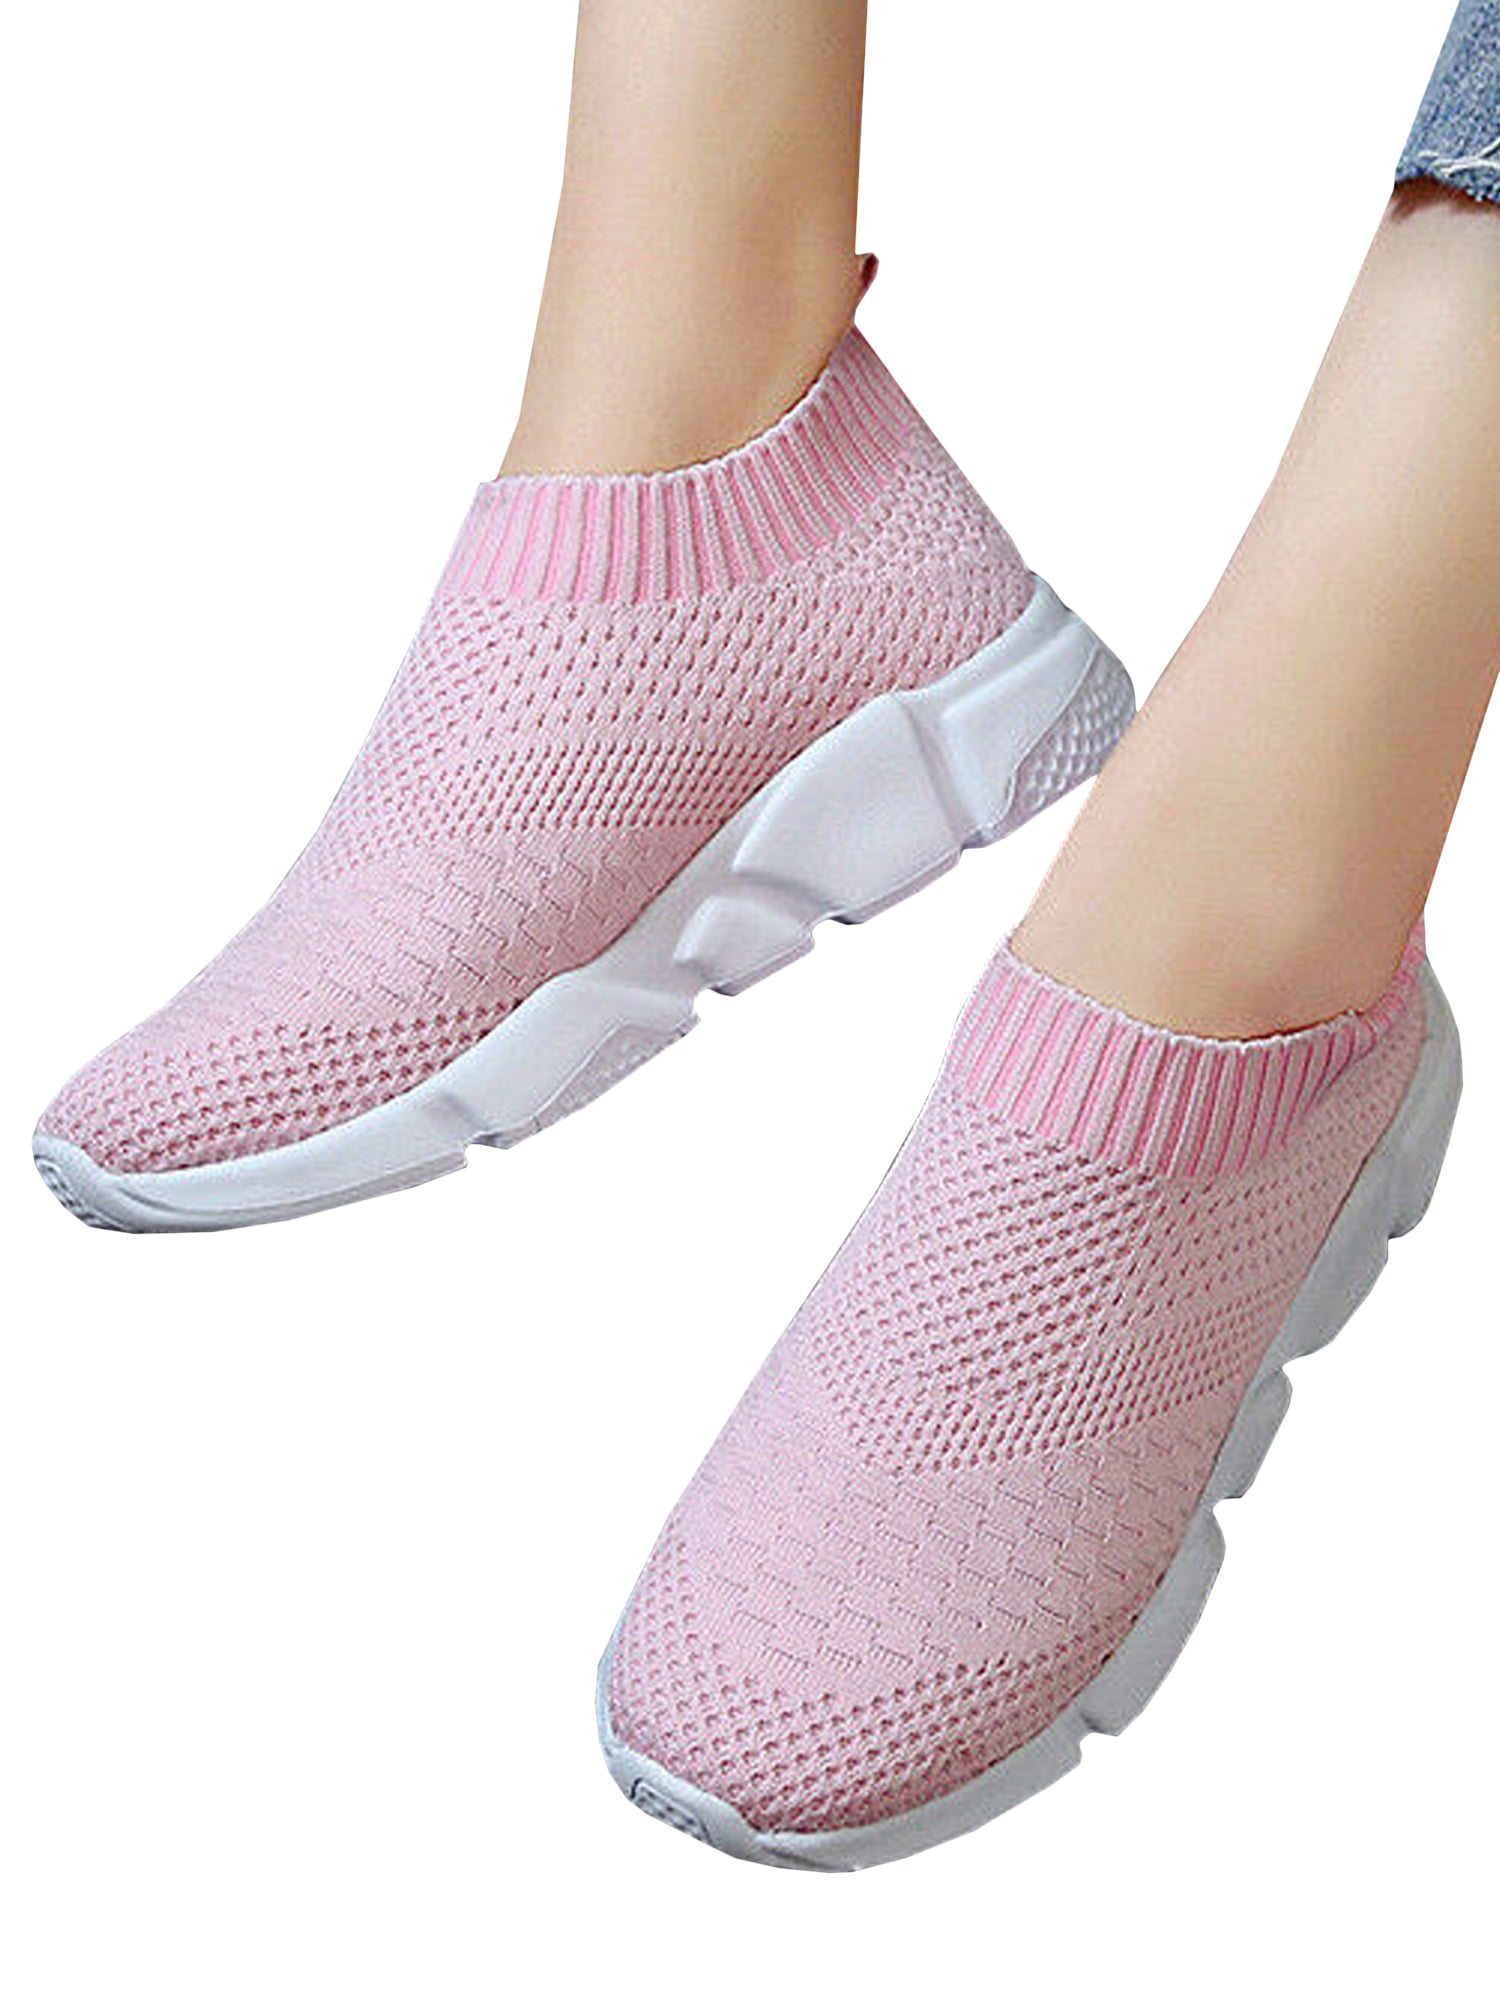 Womens Slip On Summer Sports Trainers Pumps Lady Mesh Breathable Loafer Shoes B 